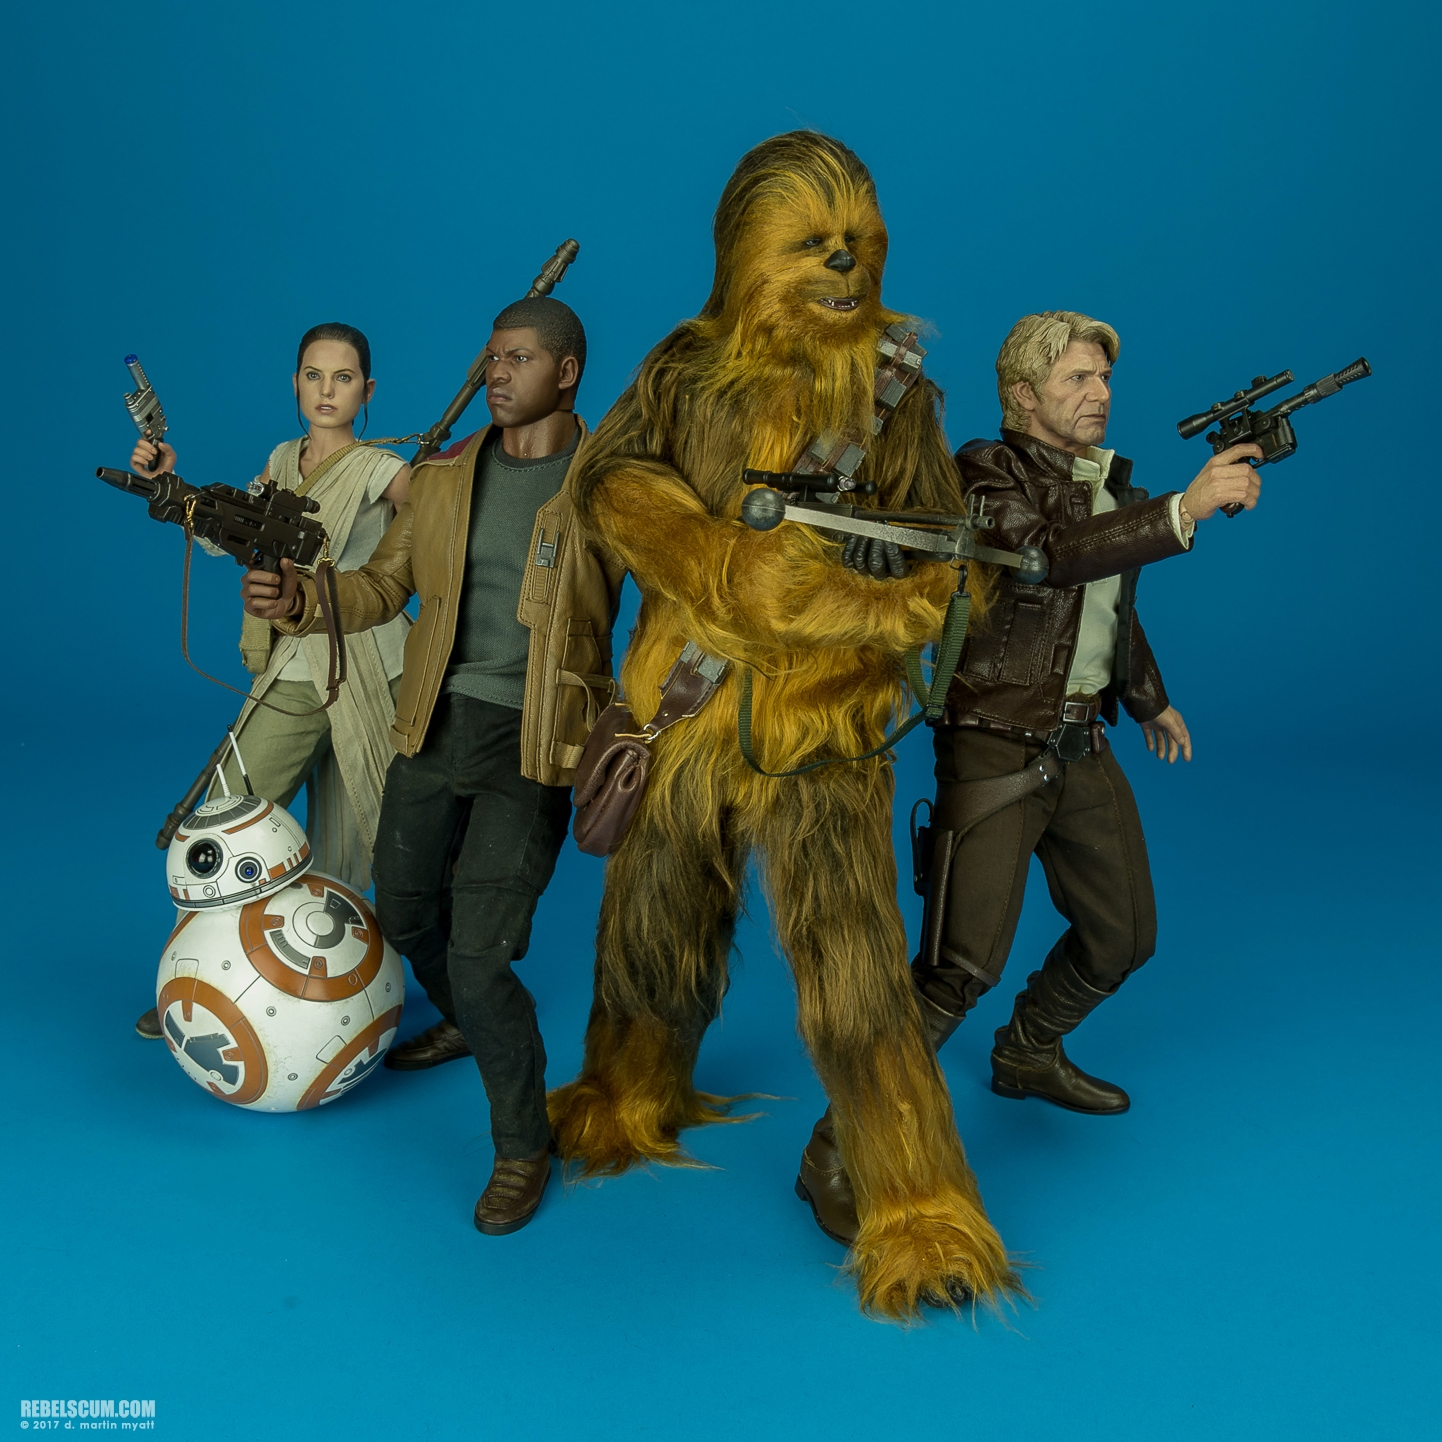 MMS376-Han-Solo-Chewbacca-The-Force-Awakens-Hot-Toys-031.jpg